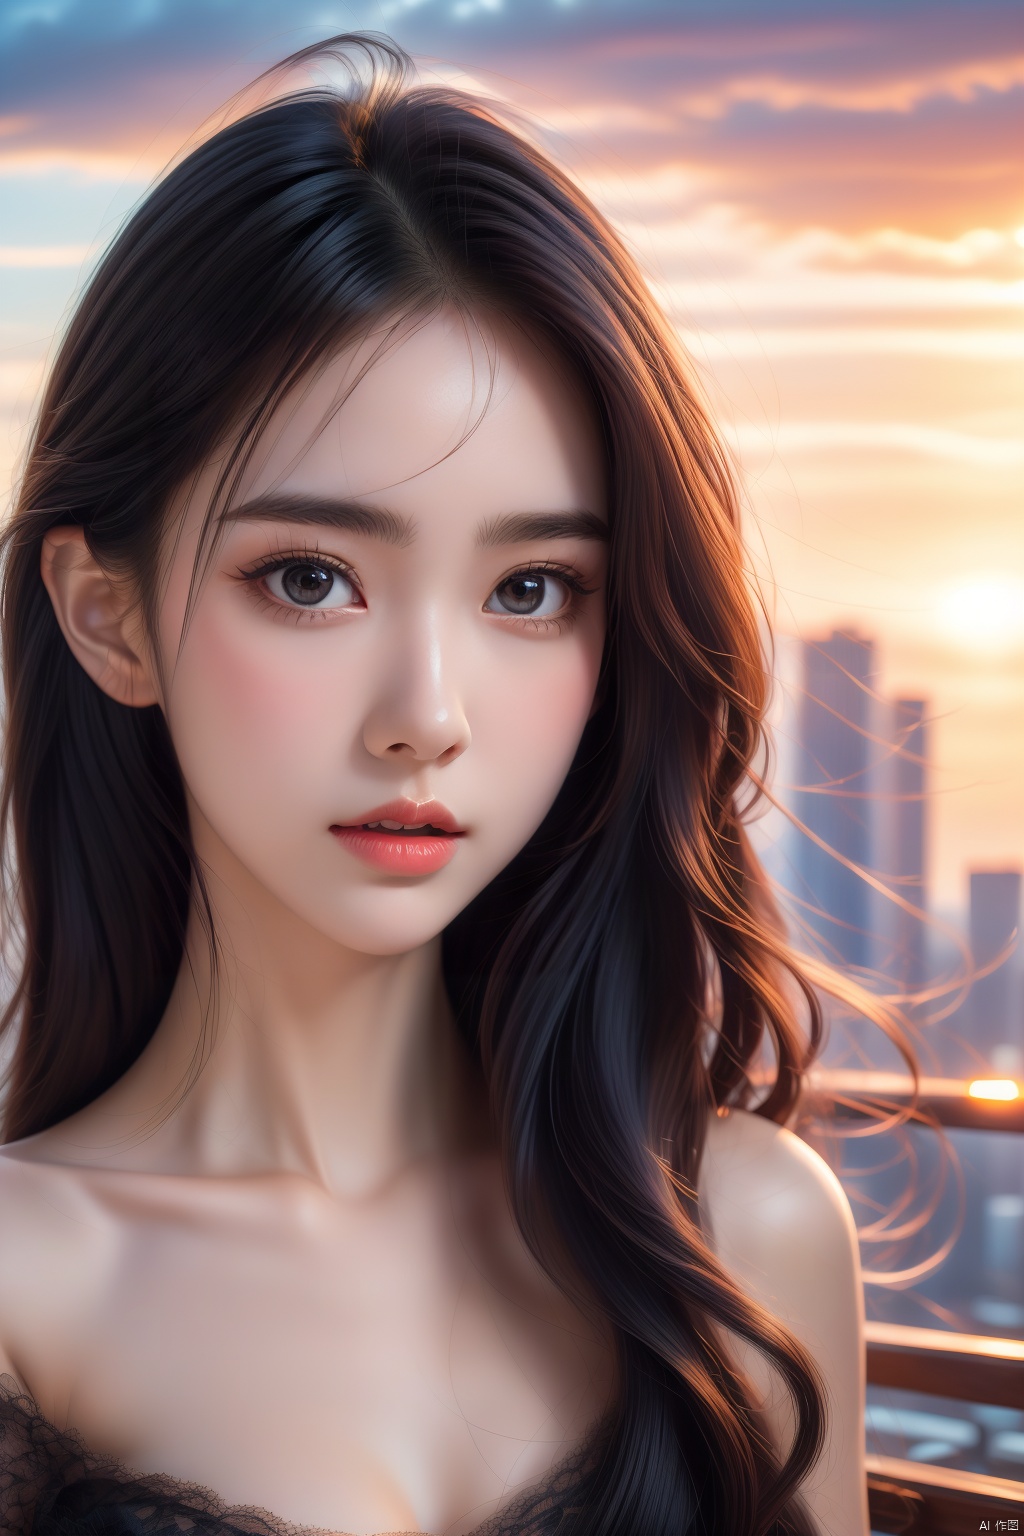  Best quality, masterpiece, photorealistic, 32K uhd, official Art,
1girl, dofas, solo,cityscape,sunset,double exposure photography